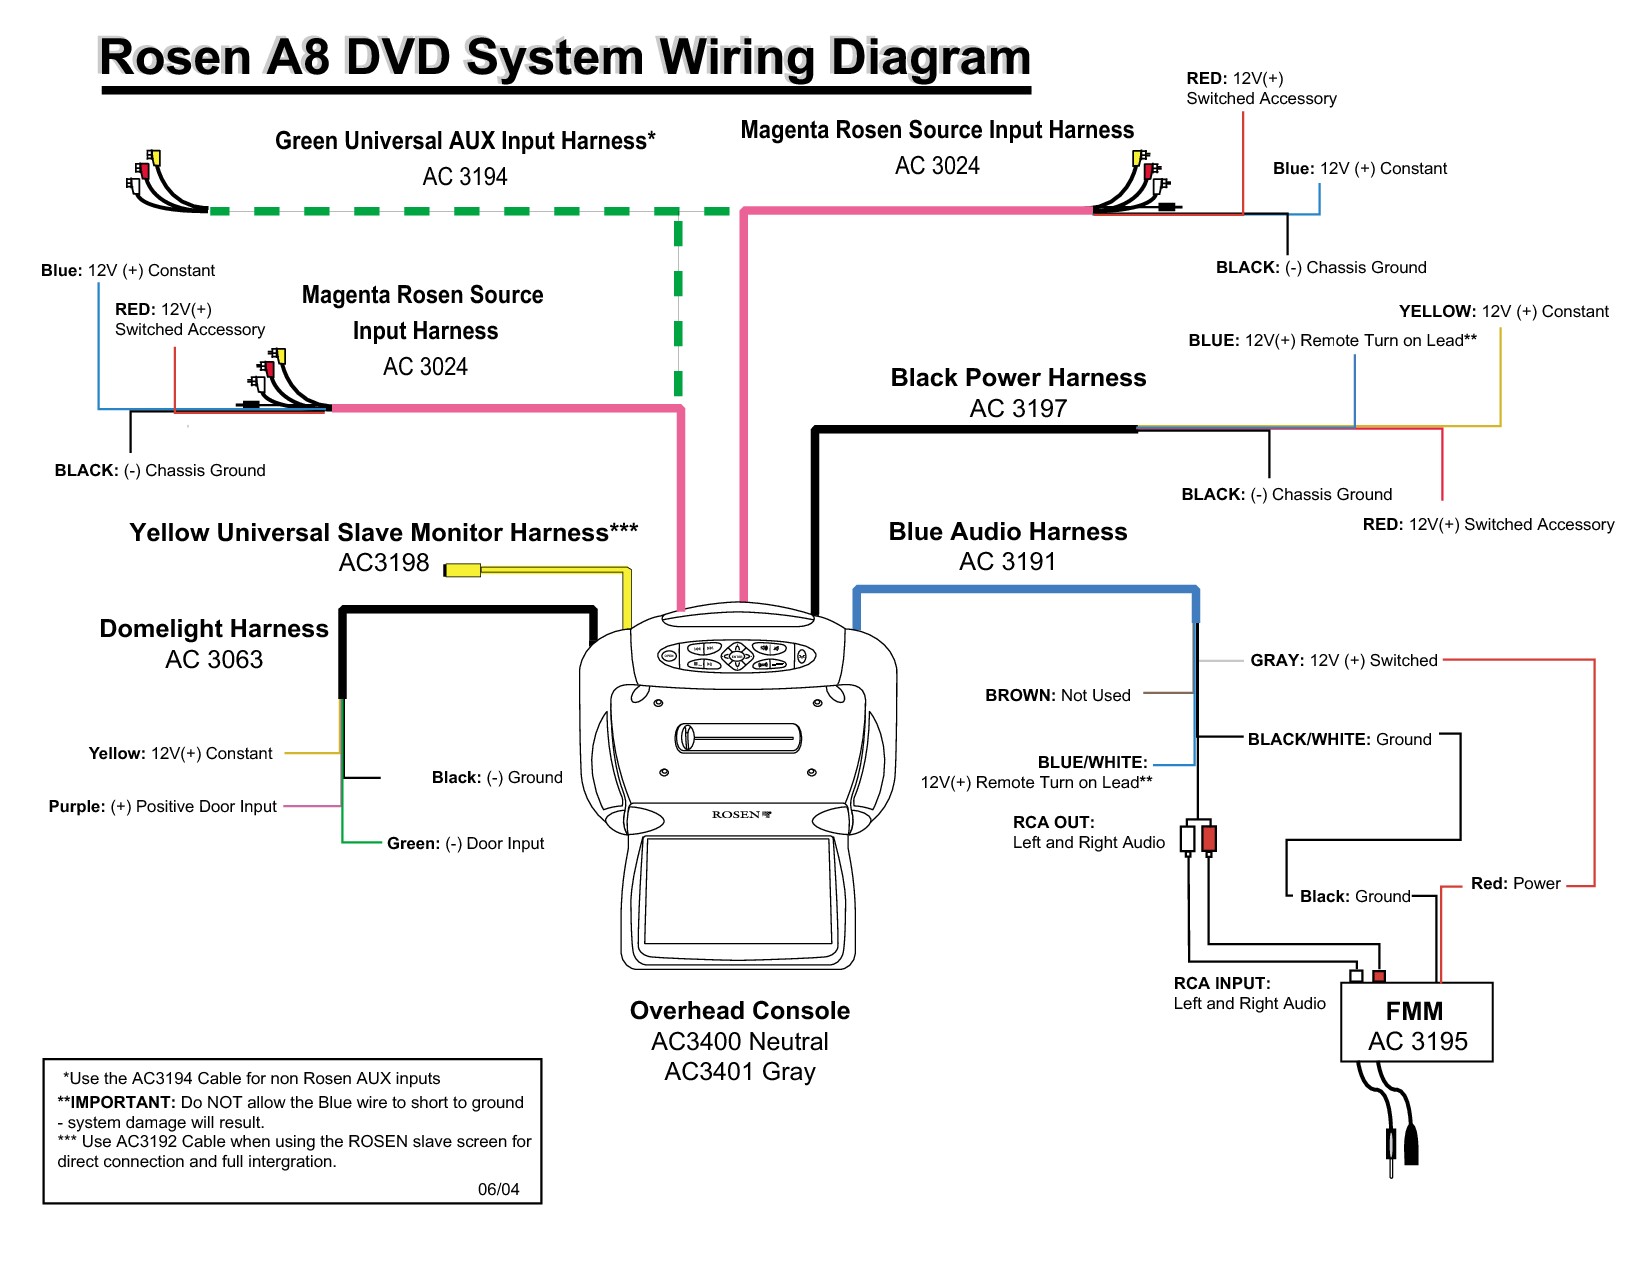 Viper 5806V Wiring Diagram from wiringall.com